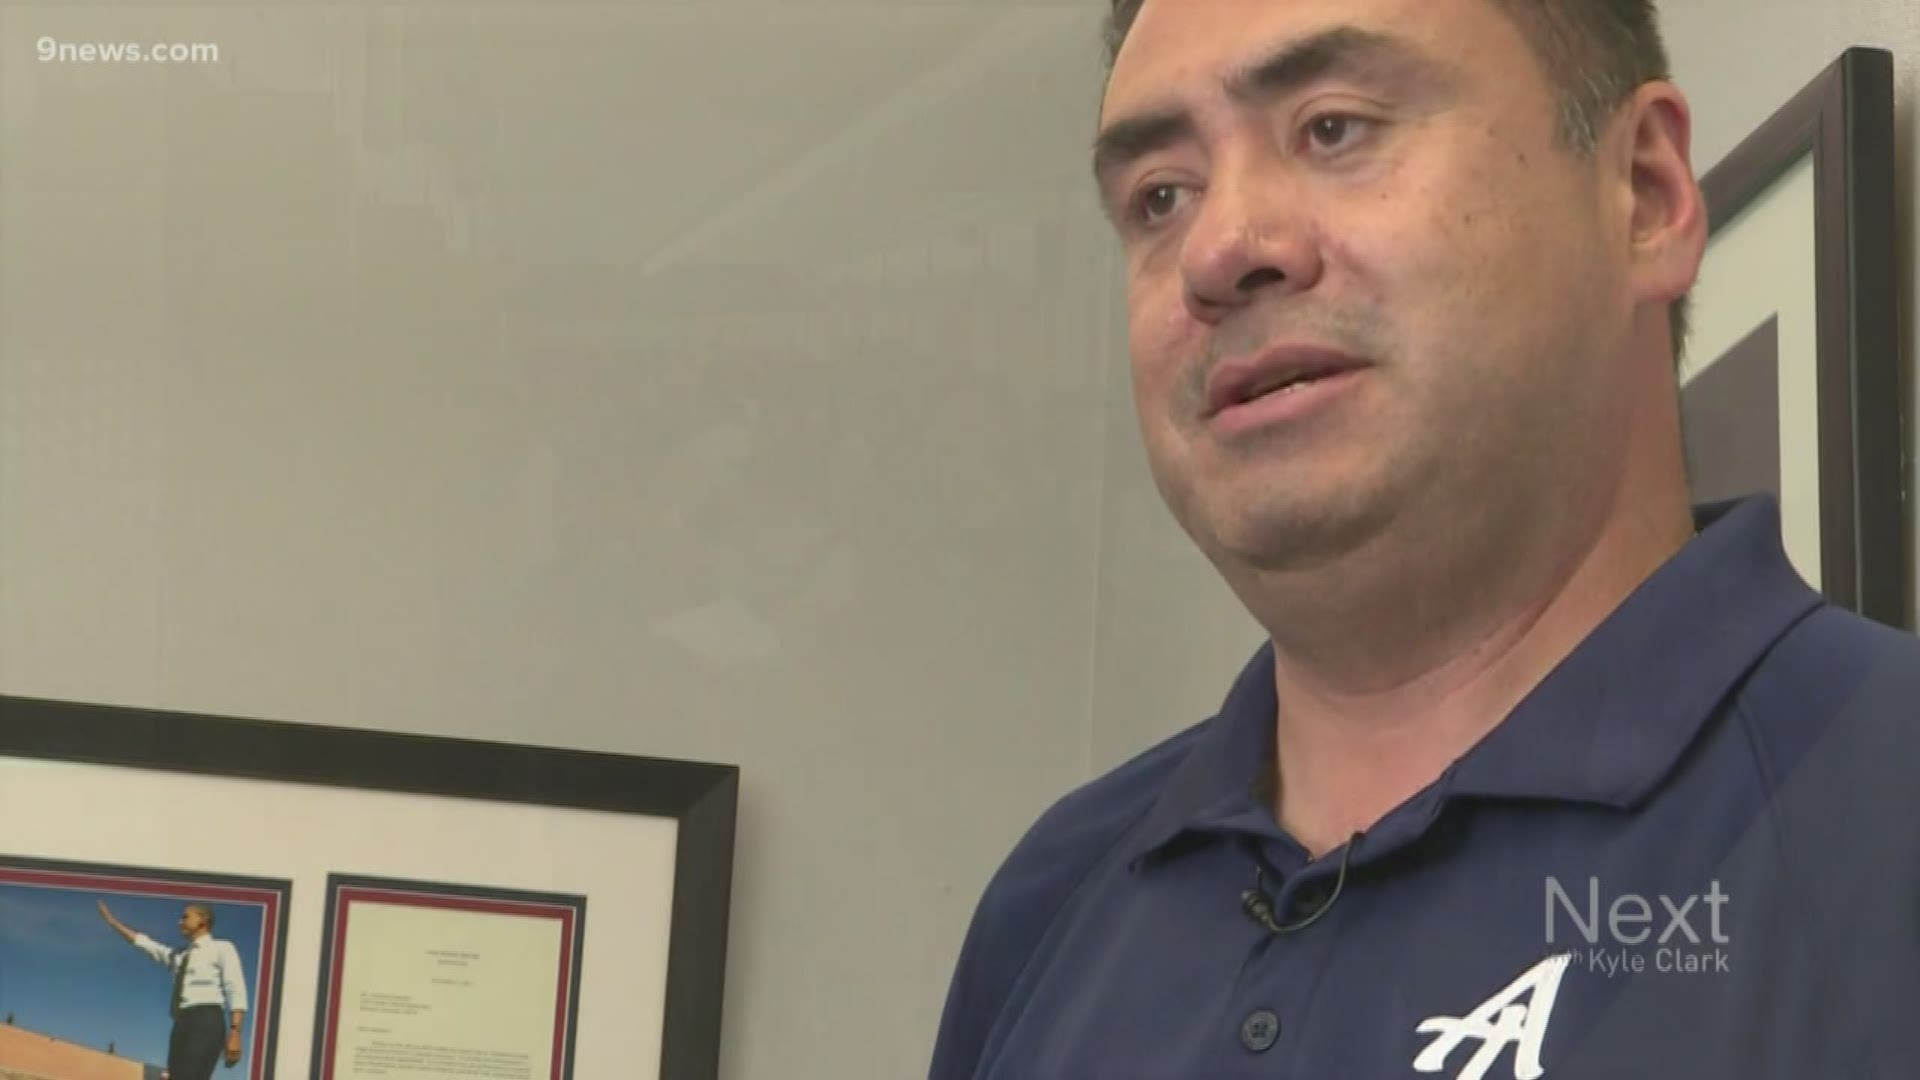 Lincoln High School is bringing back the man who fixed problems at the school the first time.